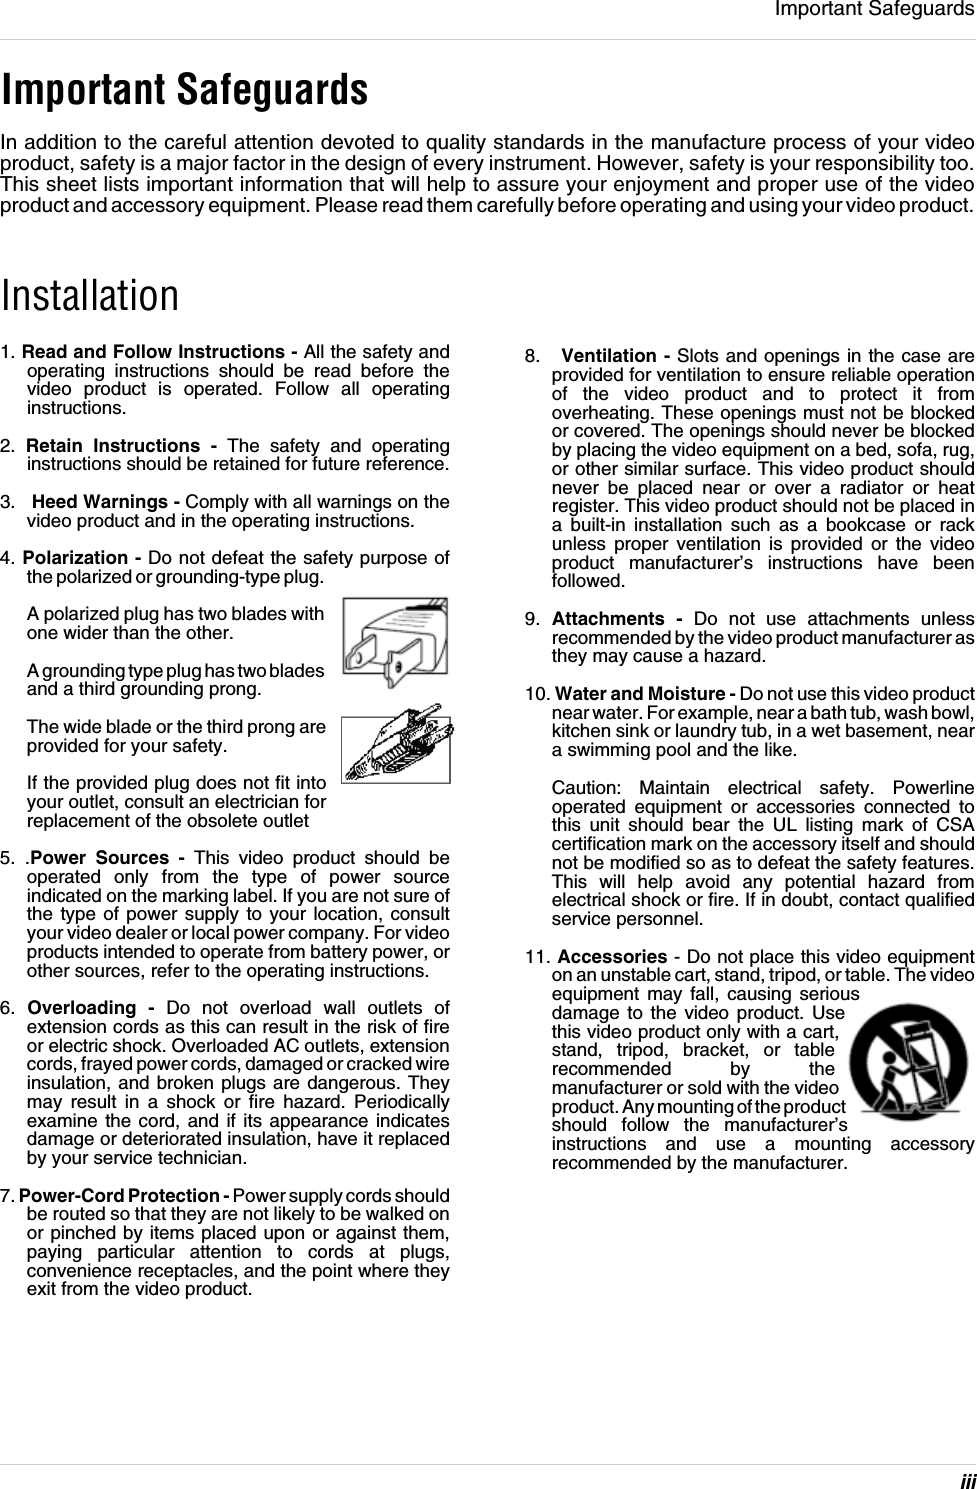 iiiImportant SafeguardsImportant SafeguardsIn addition to the careful attention devoted to quality standards in the manufacture process of your video product, safety is a major factor in the design of every instrument. However, safety is your responsibility too. This sheet lists important information that will help to assure your enjoyment and proper use of the video product and accessory equipment. Please read them carefully before operating and using your video product.Installation1. Read and Follow Instructions - All the safety and operating instructions should be read before the video product is operated. Follow all operating instructions.2.  Retain Instructions - The safety and operating instructions should be retained for future reference.3.   Heed Warnings - Comply with all warnings on the video product and in the operating instructions.4. Polarization - Do not defeat the safety purpose of the polarized or grounding-type plug.A polarized plug has two blades with one wider than the other.A grounding type plug has two blades and a third grounding prong.The wide blade or the third prong are provided for your safety.If the provided plug does not fit into your outlet, consult an electrician for replacement of the obsolete outlet5. .Power Sources - This video product should be operated only from the type of power source indicated on the marking label. If you are not sure of the type of power supply to your location, consult your video dealer or local power company. For video products intended to operate from battery power, or other sources, refer to the operating instructions.6.  Overloading - Do not overload wall outlets of extension cords as this can result in the risk of fire or electric shock. Overloaded AC outlets, extension cords, frayed power cords, damaged or cracked wire insulation, and broken plugs are dangerous. They may result in a shock or fire hazard. Periodically examine the cord, and if its appearance indicates damage or deteriorated insulation, have it replaced by your service technician.7. Power-Cord Protection - Power supply cords should be routed so that they are not likely to be walked on or pinched by items placed upon or against them, paying particular attention to cords at plugs, convenience receptacles, and the point where they exit from the video product.8.   Ventilation - Slots and openings in the case are provided for ventilation to ensure reliable operation of the video product and to protect it from overheating. These openings must not be blocked or covered. The openings should never be blocked by placing the video equipment on a bed, sofa, rug, or other similar surface. This video product should never be placed near or over a radiator or heat register. This video product should not be placed in a built-in installation such as a bookcase or rack unless proper ventilation is provided or the video product manufacturer’s instructions have been followed.9.  Attachments - Do not use attachments unless recommended by the video product manufacturer as they may cause a hazard.10. Water and Moisture - Do not use this video product near water. For example, near a bath tub, wash bowl, kitchen sink or laundry tub, in a wet basement, near a swimming pool and the like. Caution: Maintain electrical safety. Powerline operated equipment or accessories connected to this unit should bear the UL listing mark of CSA certification mark on the accessory itself and should not be modified so as to defeat the safety features. This will help avoid any potential hazard from electrical shock or fire. If in doubt, contact qualified service personnel.11. Accessories - Do not place this video equipment on an unstable cart, stand, tripod, or table. The video equipment may fall, causing serious damage to the video product. Use this video product only with a cart, stand, tripod, bracket, or table recommended by the manufacturer or sold with the video product. Any mounting of the product should follow the manufacturer’s instructions and use a mounting accessory recommended by the manufacturer.